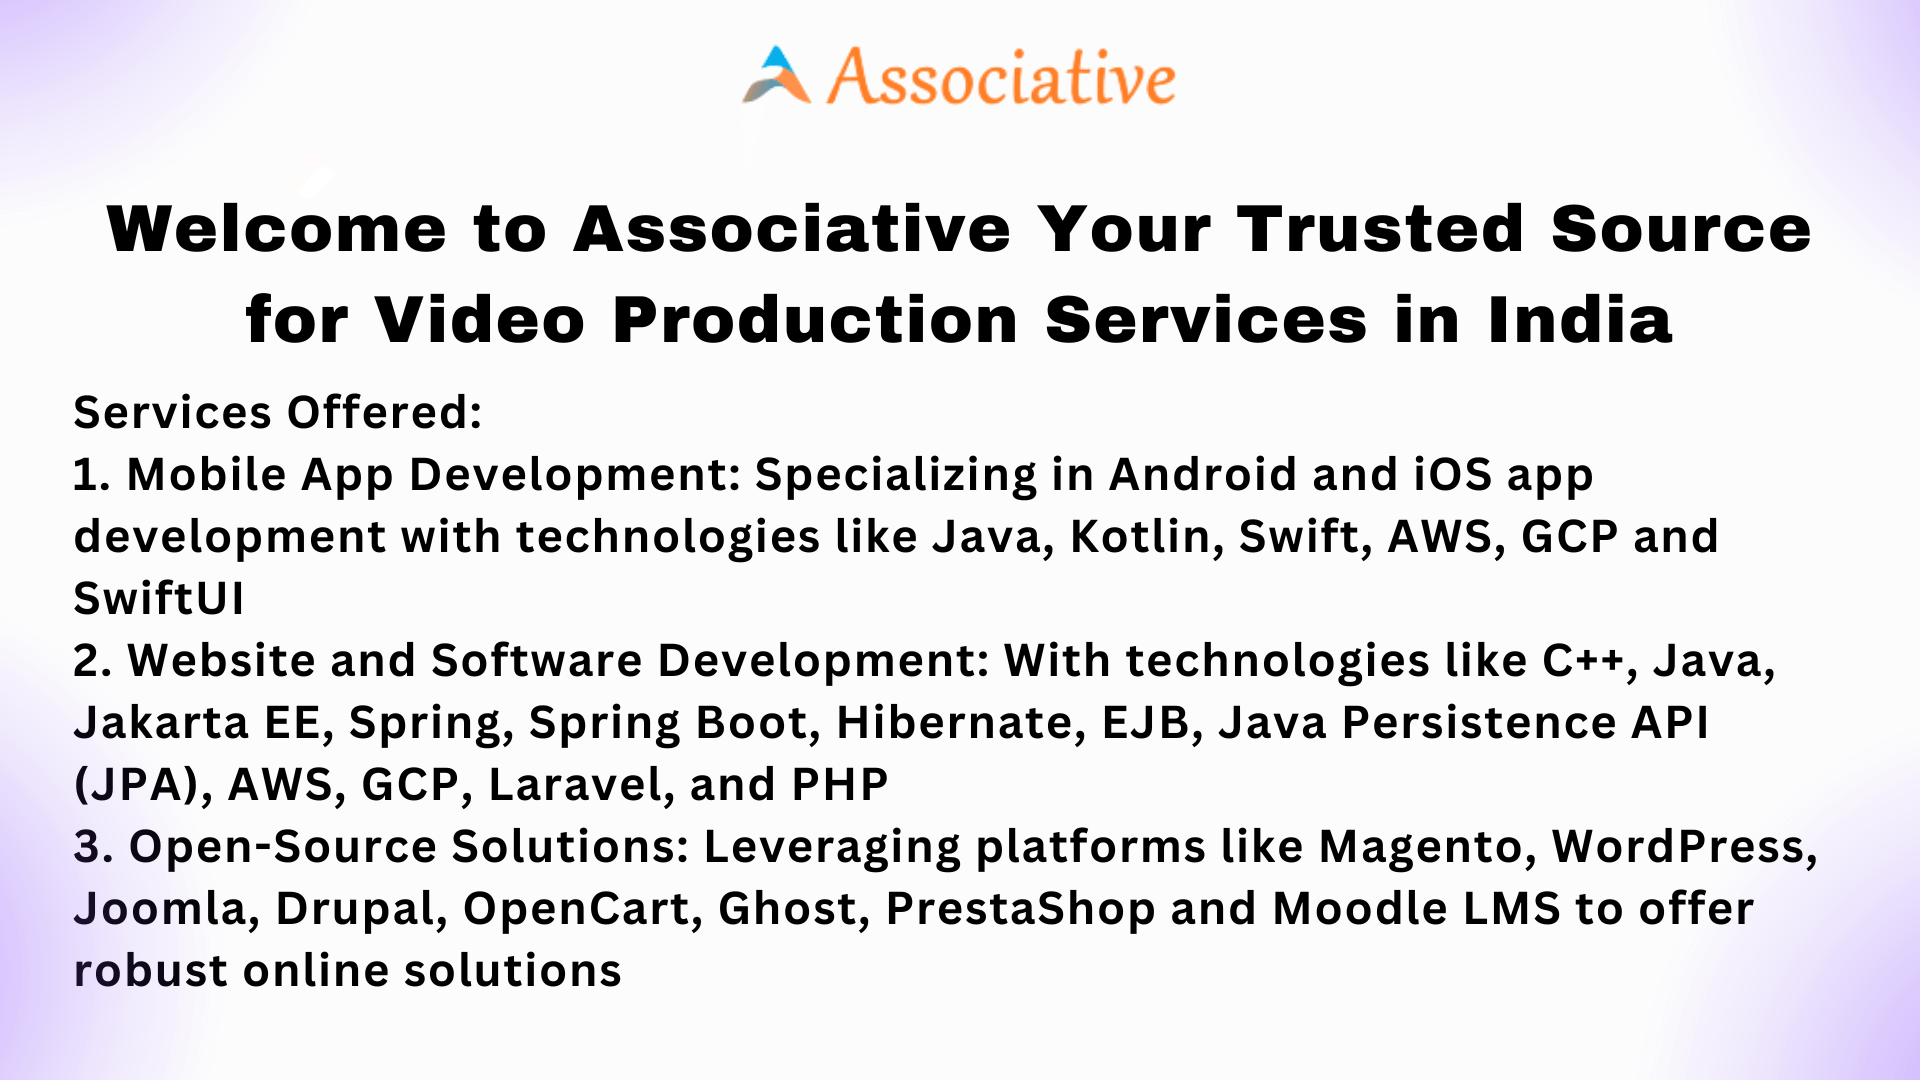 Welcome to Associative Your Trusted Source for Video Production Services in India